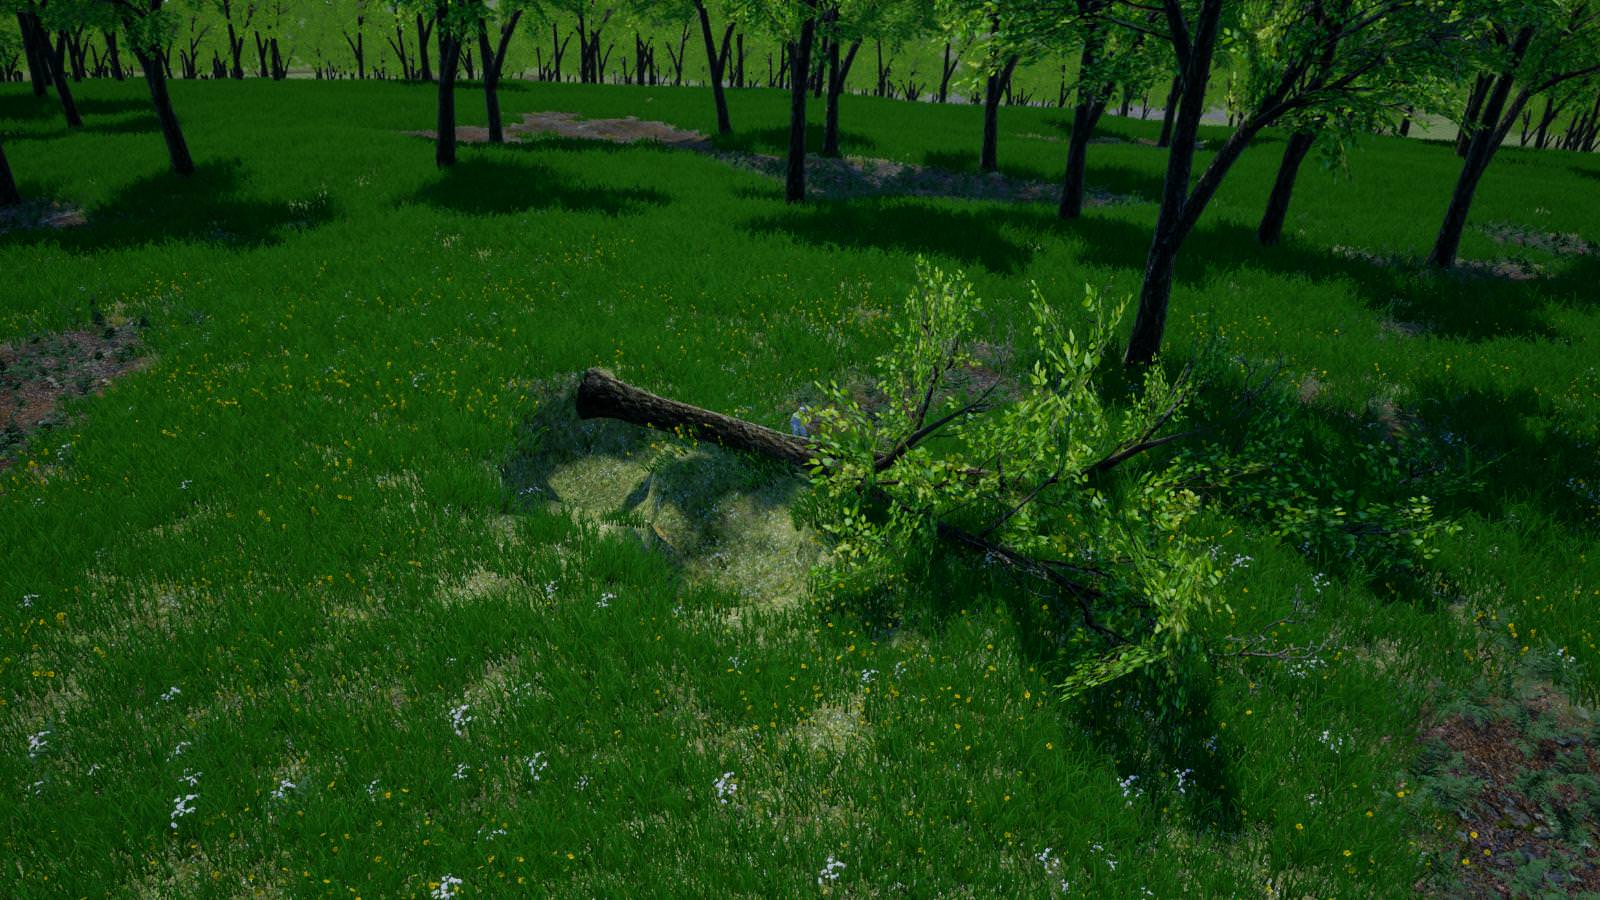 Grass & Voxel Actors (Pro only)